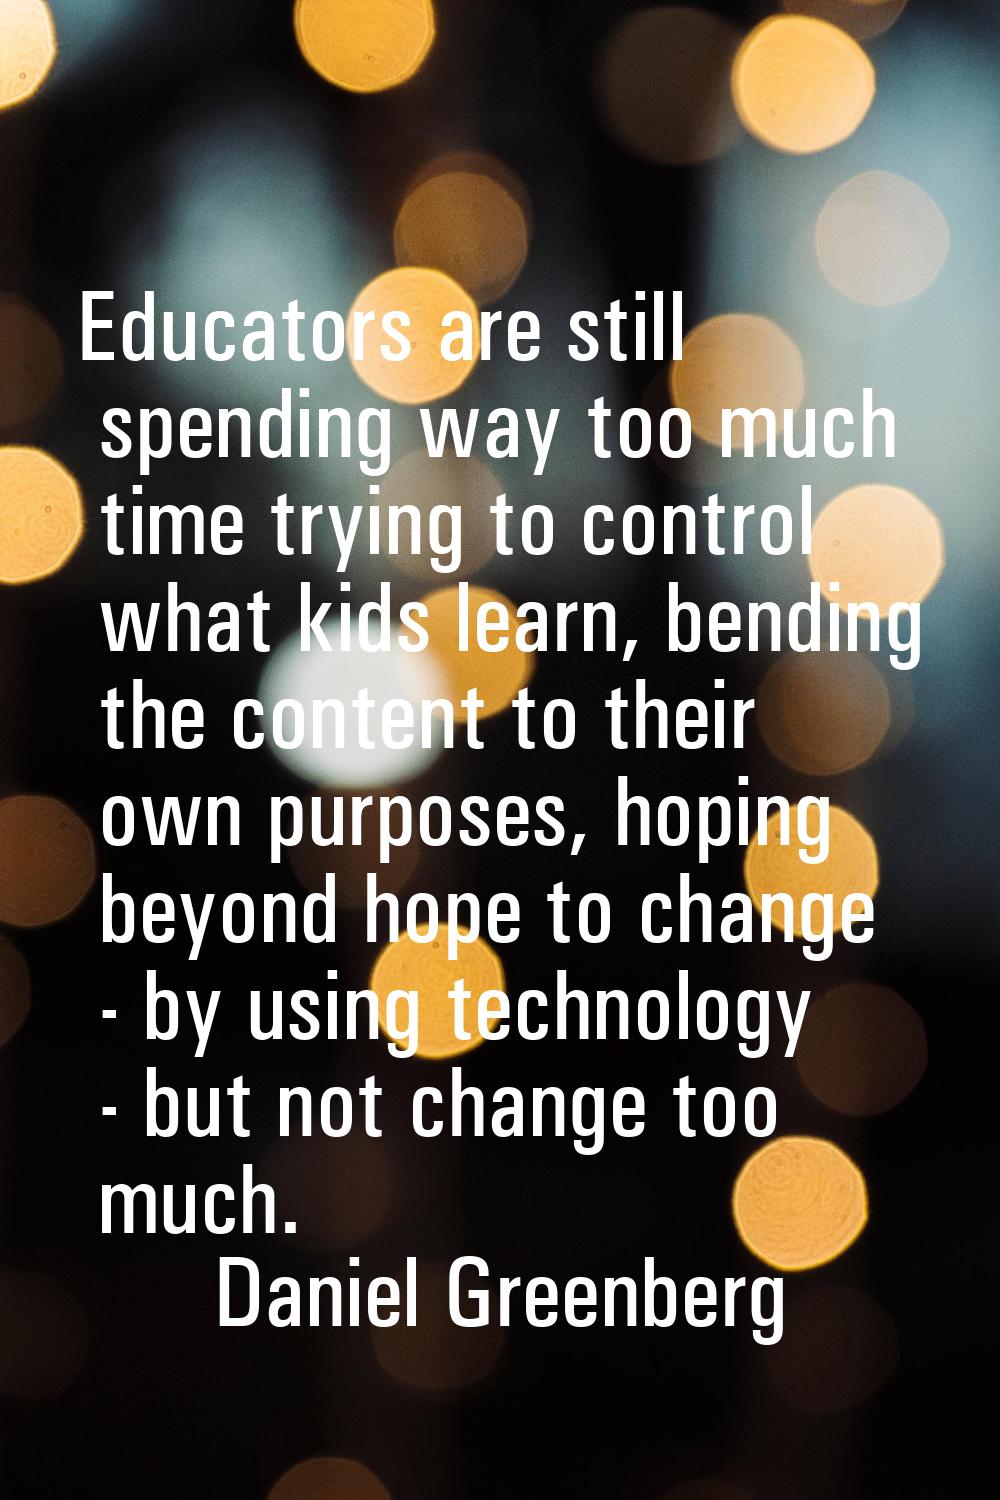 Educators are still spending way too much time trying to control what kids learn, bending the conte